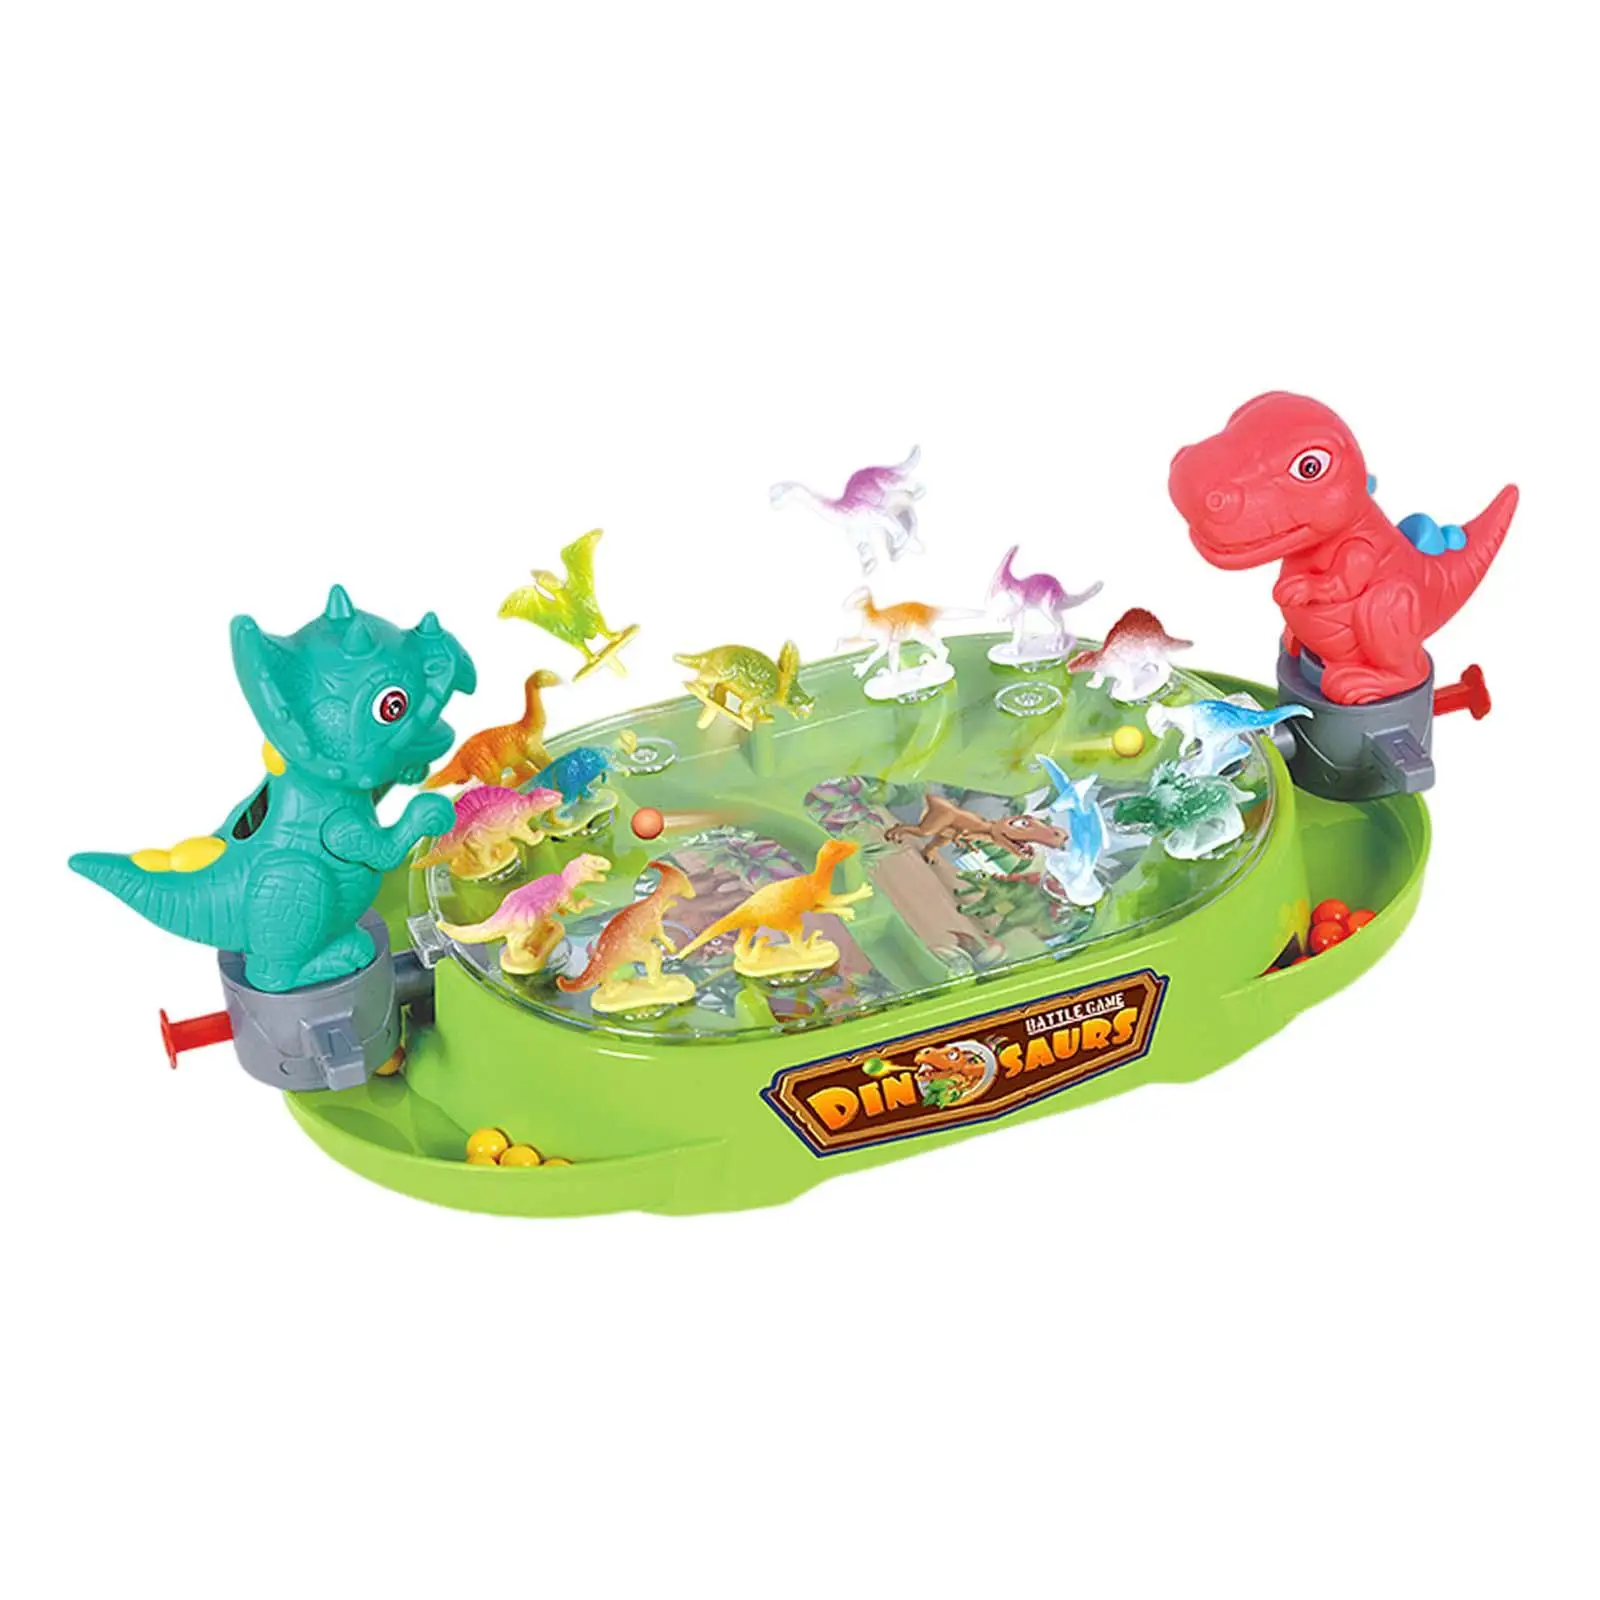 Dinosaur Board Play Double Player Dinosaurs Toys Game for Boys Gift Kids